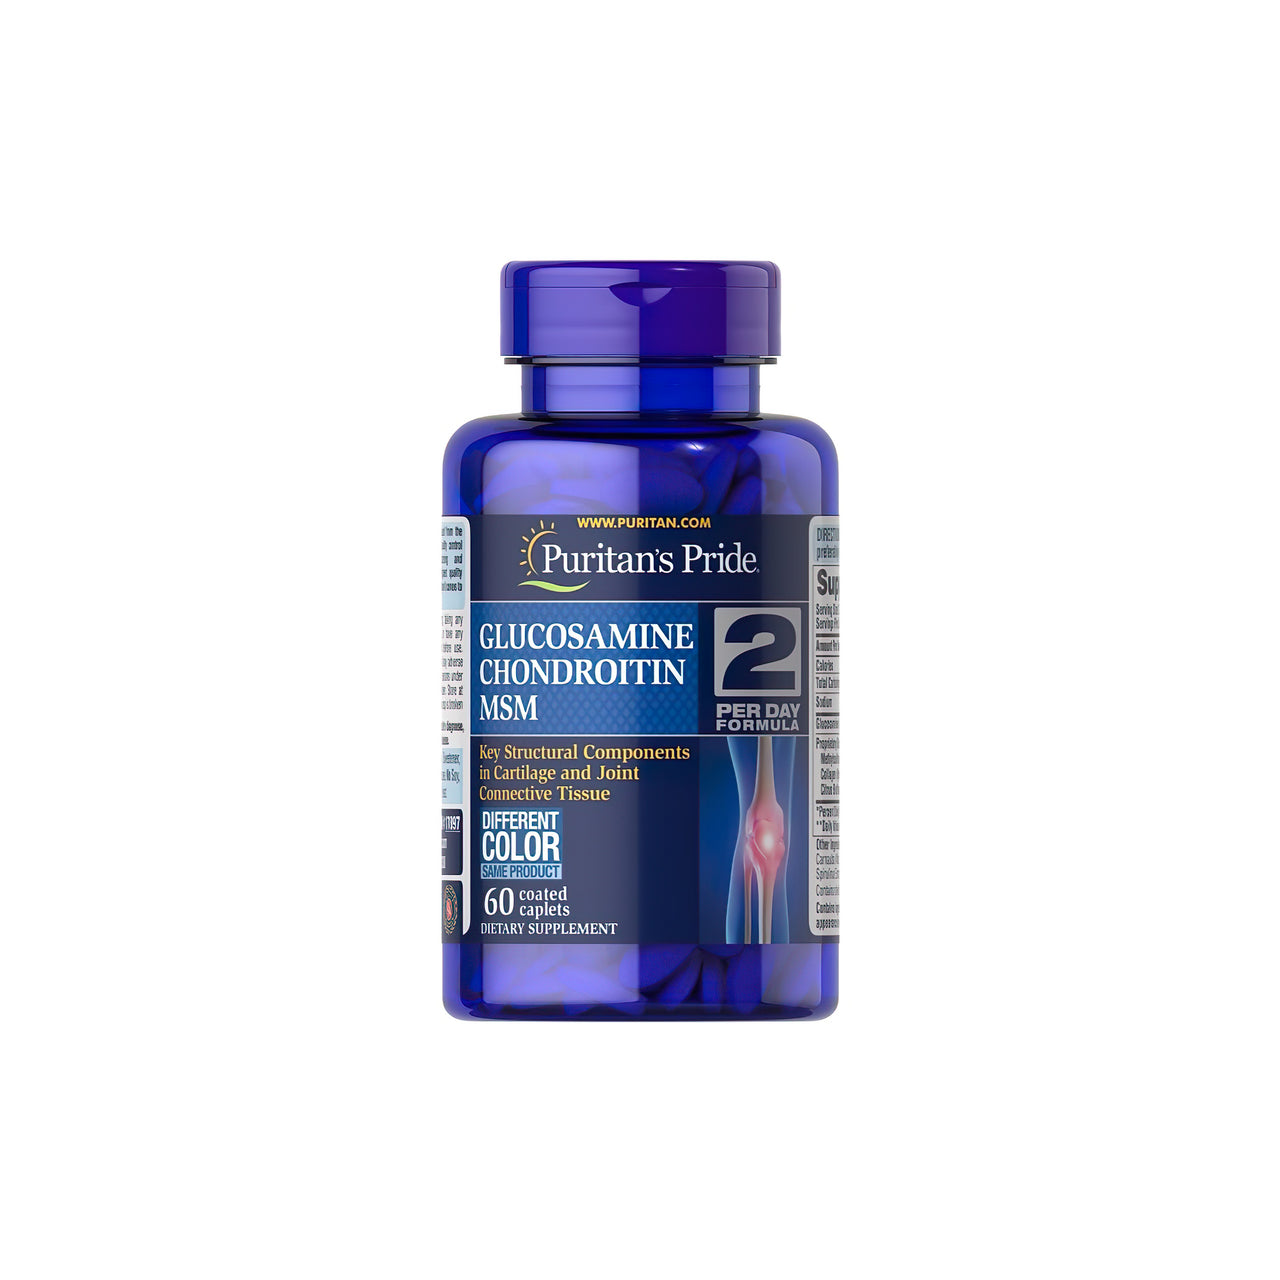 Triple Strength Glucosamine, Chondroitin & MSM 60 coated caplets - front